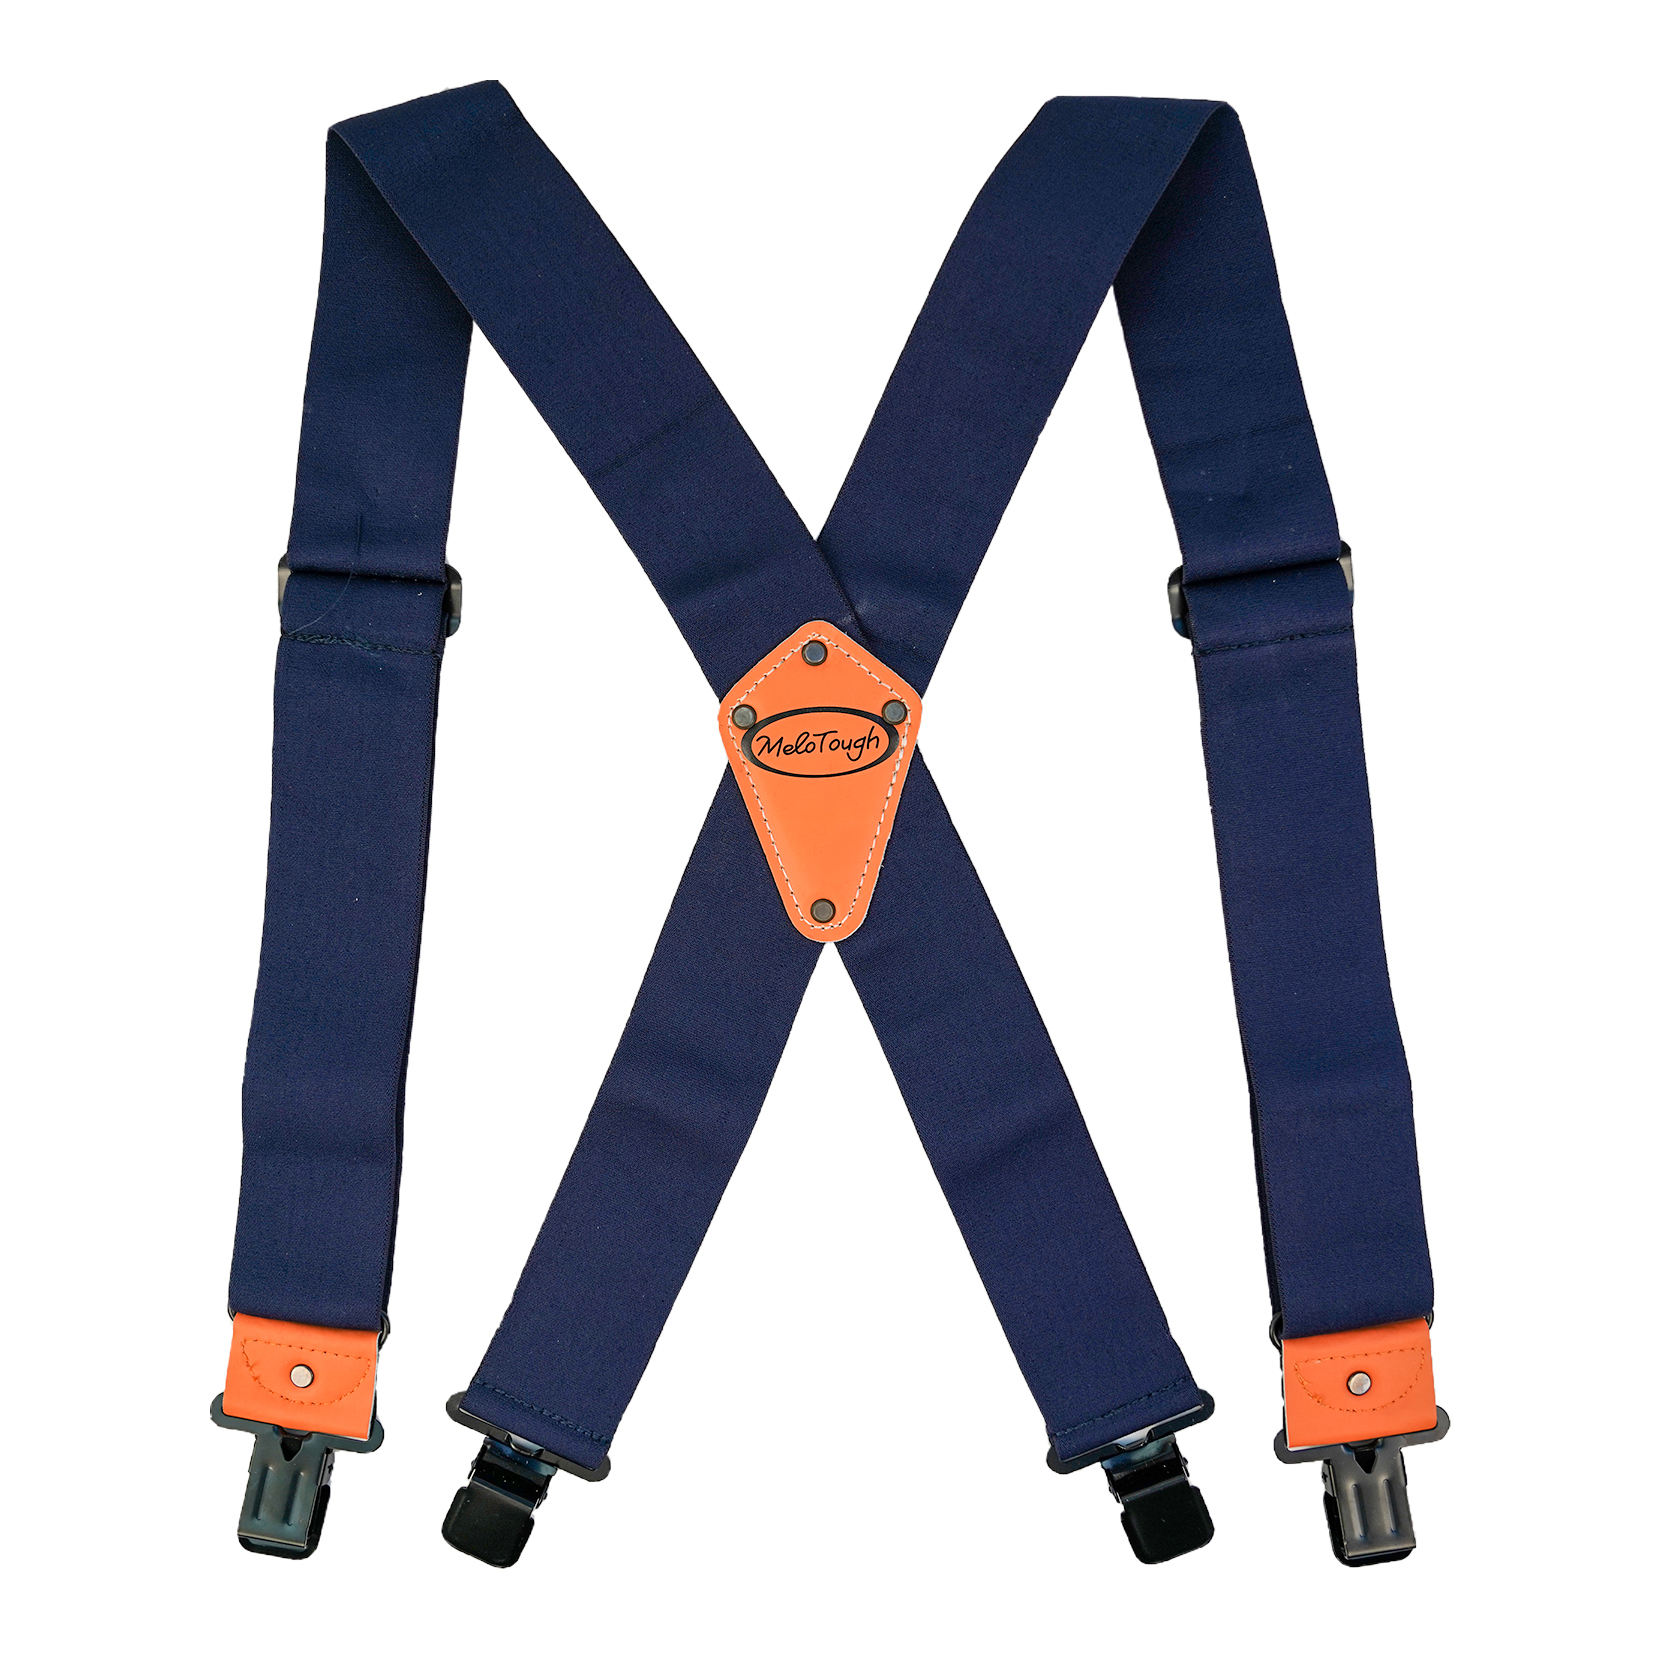 Melo Tough MELOTOUGH Navy Blue Suspender 2 inch Heavy Duty Adjustable Work Suspenders for Men Big and Tall, Adult Unisex, Size: Single Size